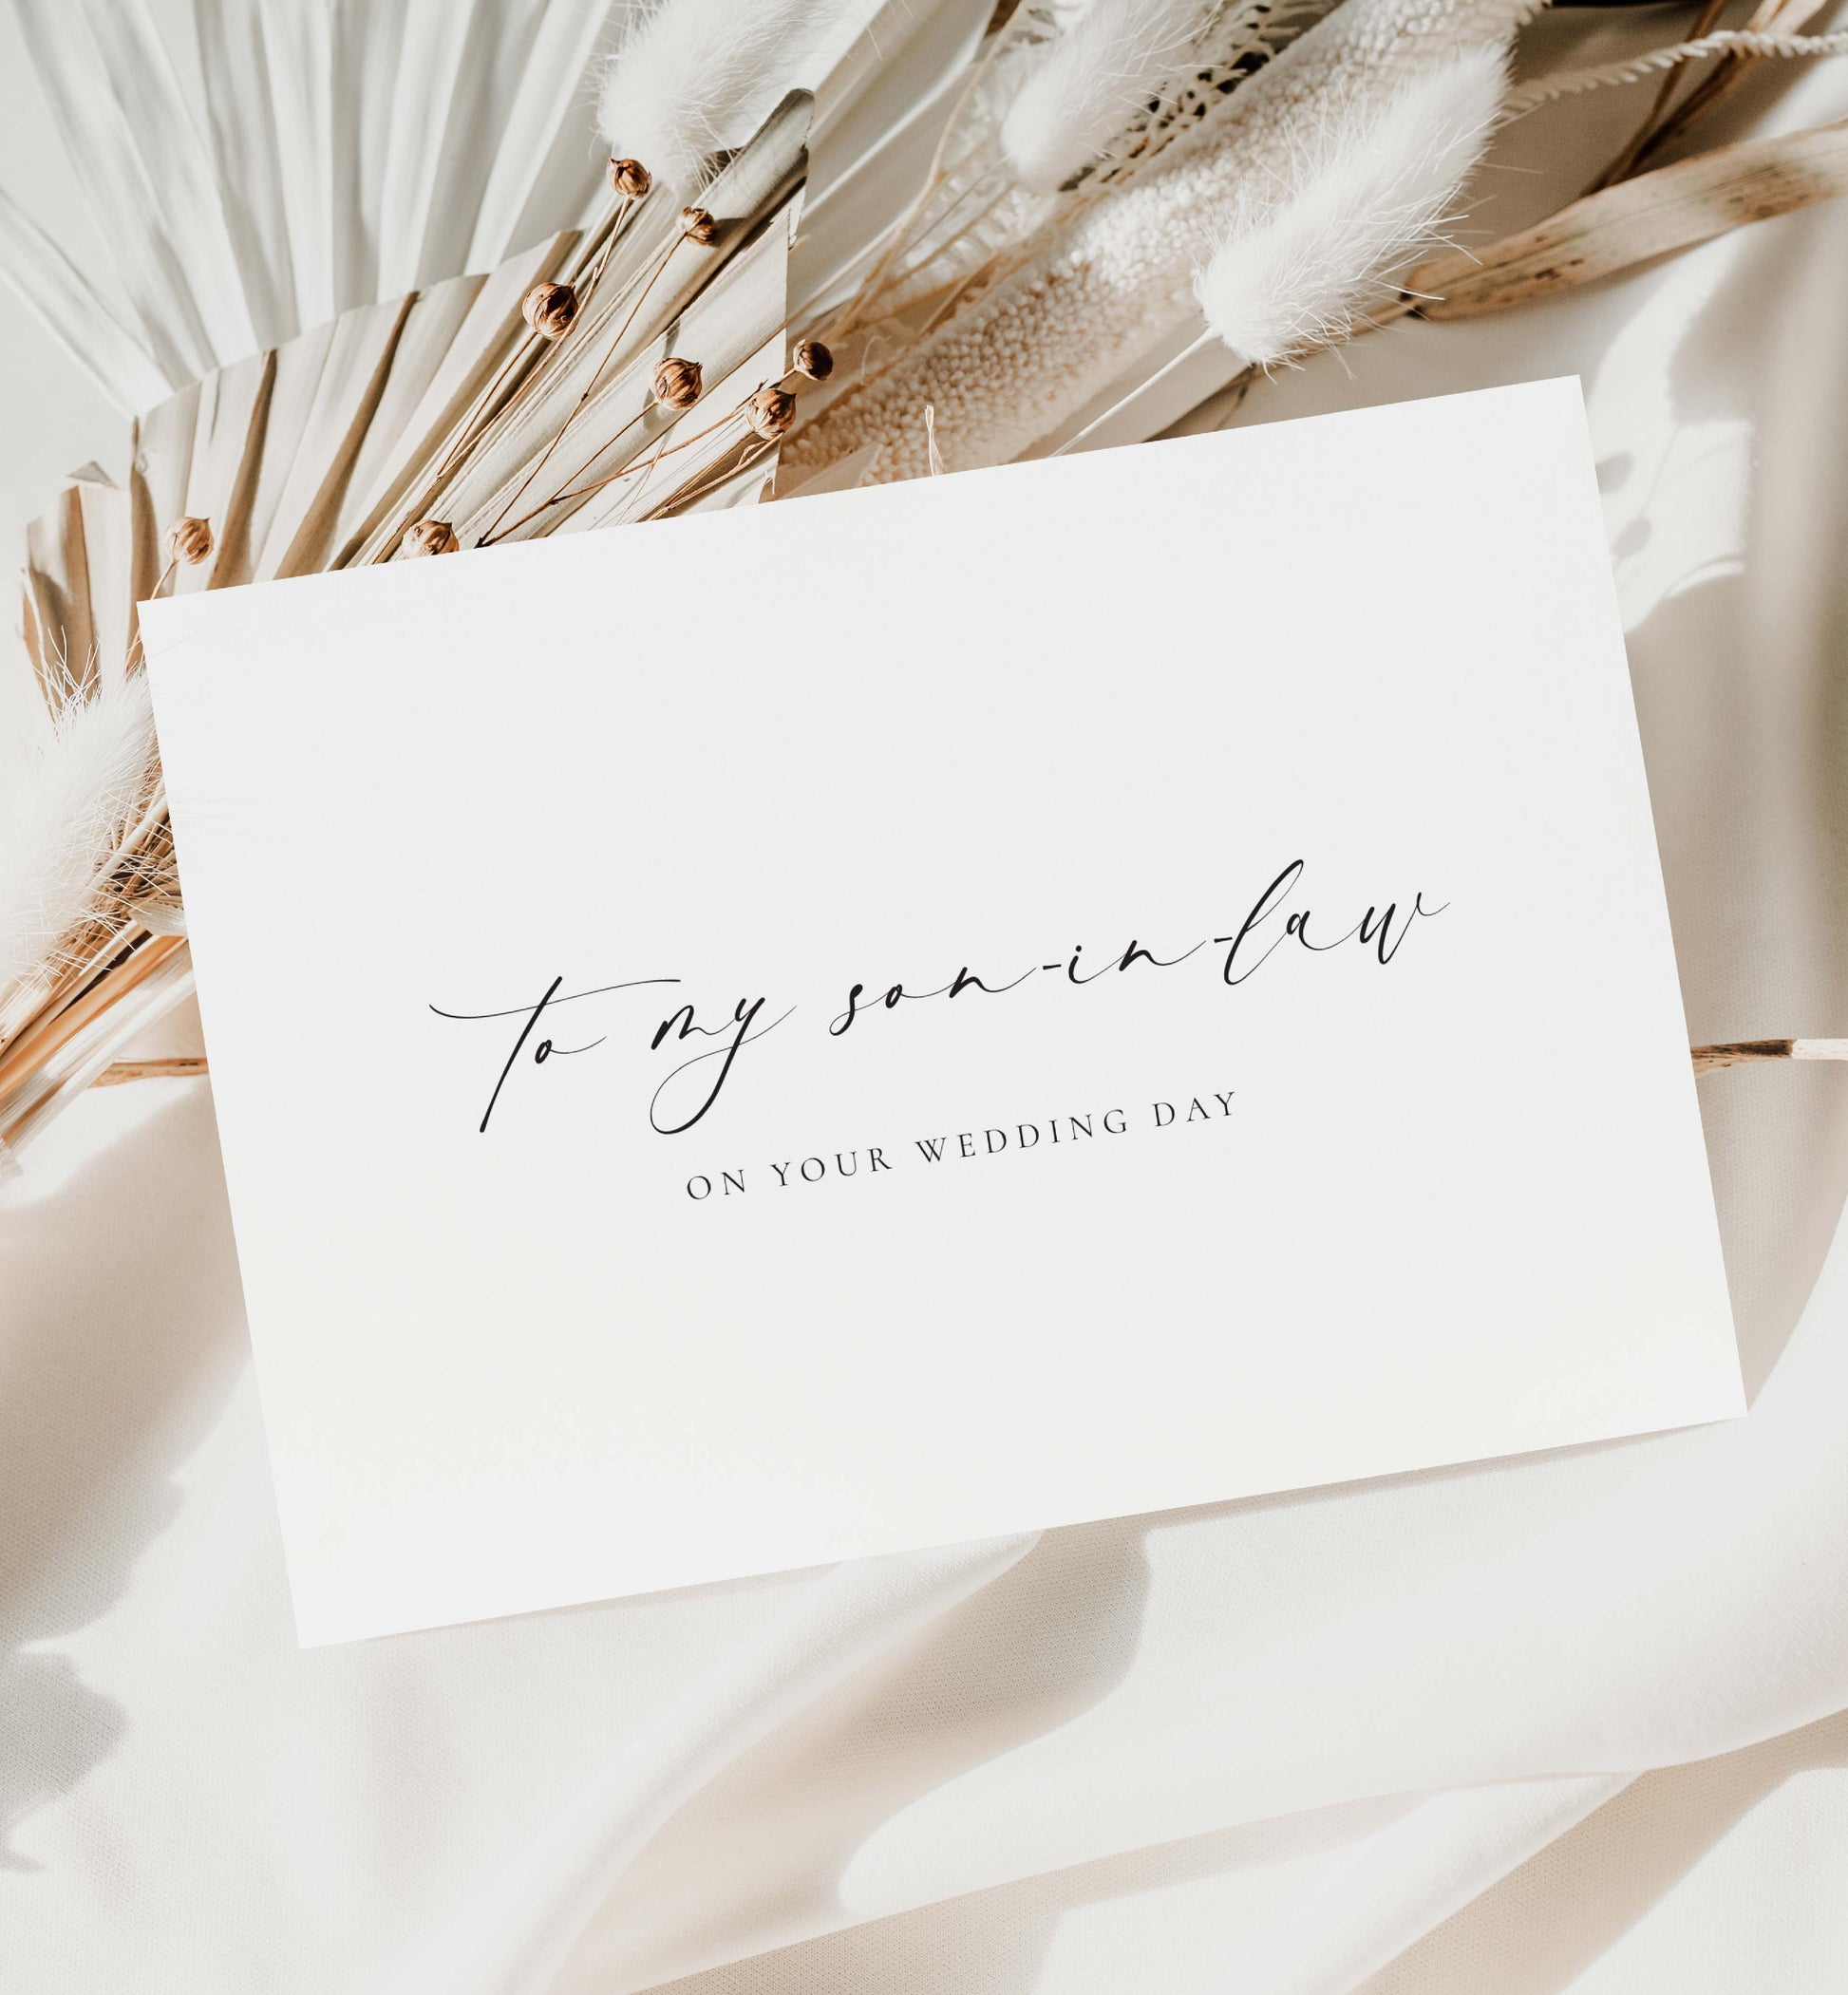 To My Son-In-Law On Your Wedding Day Card, Modern Minimalist Wedding Day Card, In-Laws To Groom Wedding Day Card, Ivory, Ellesmere